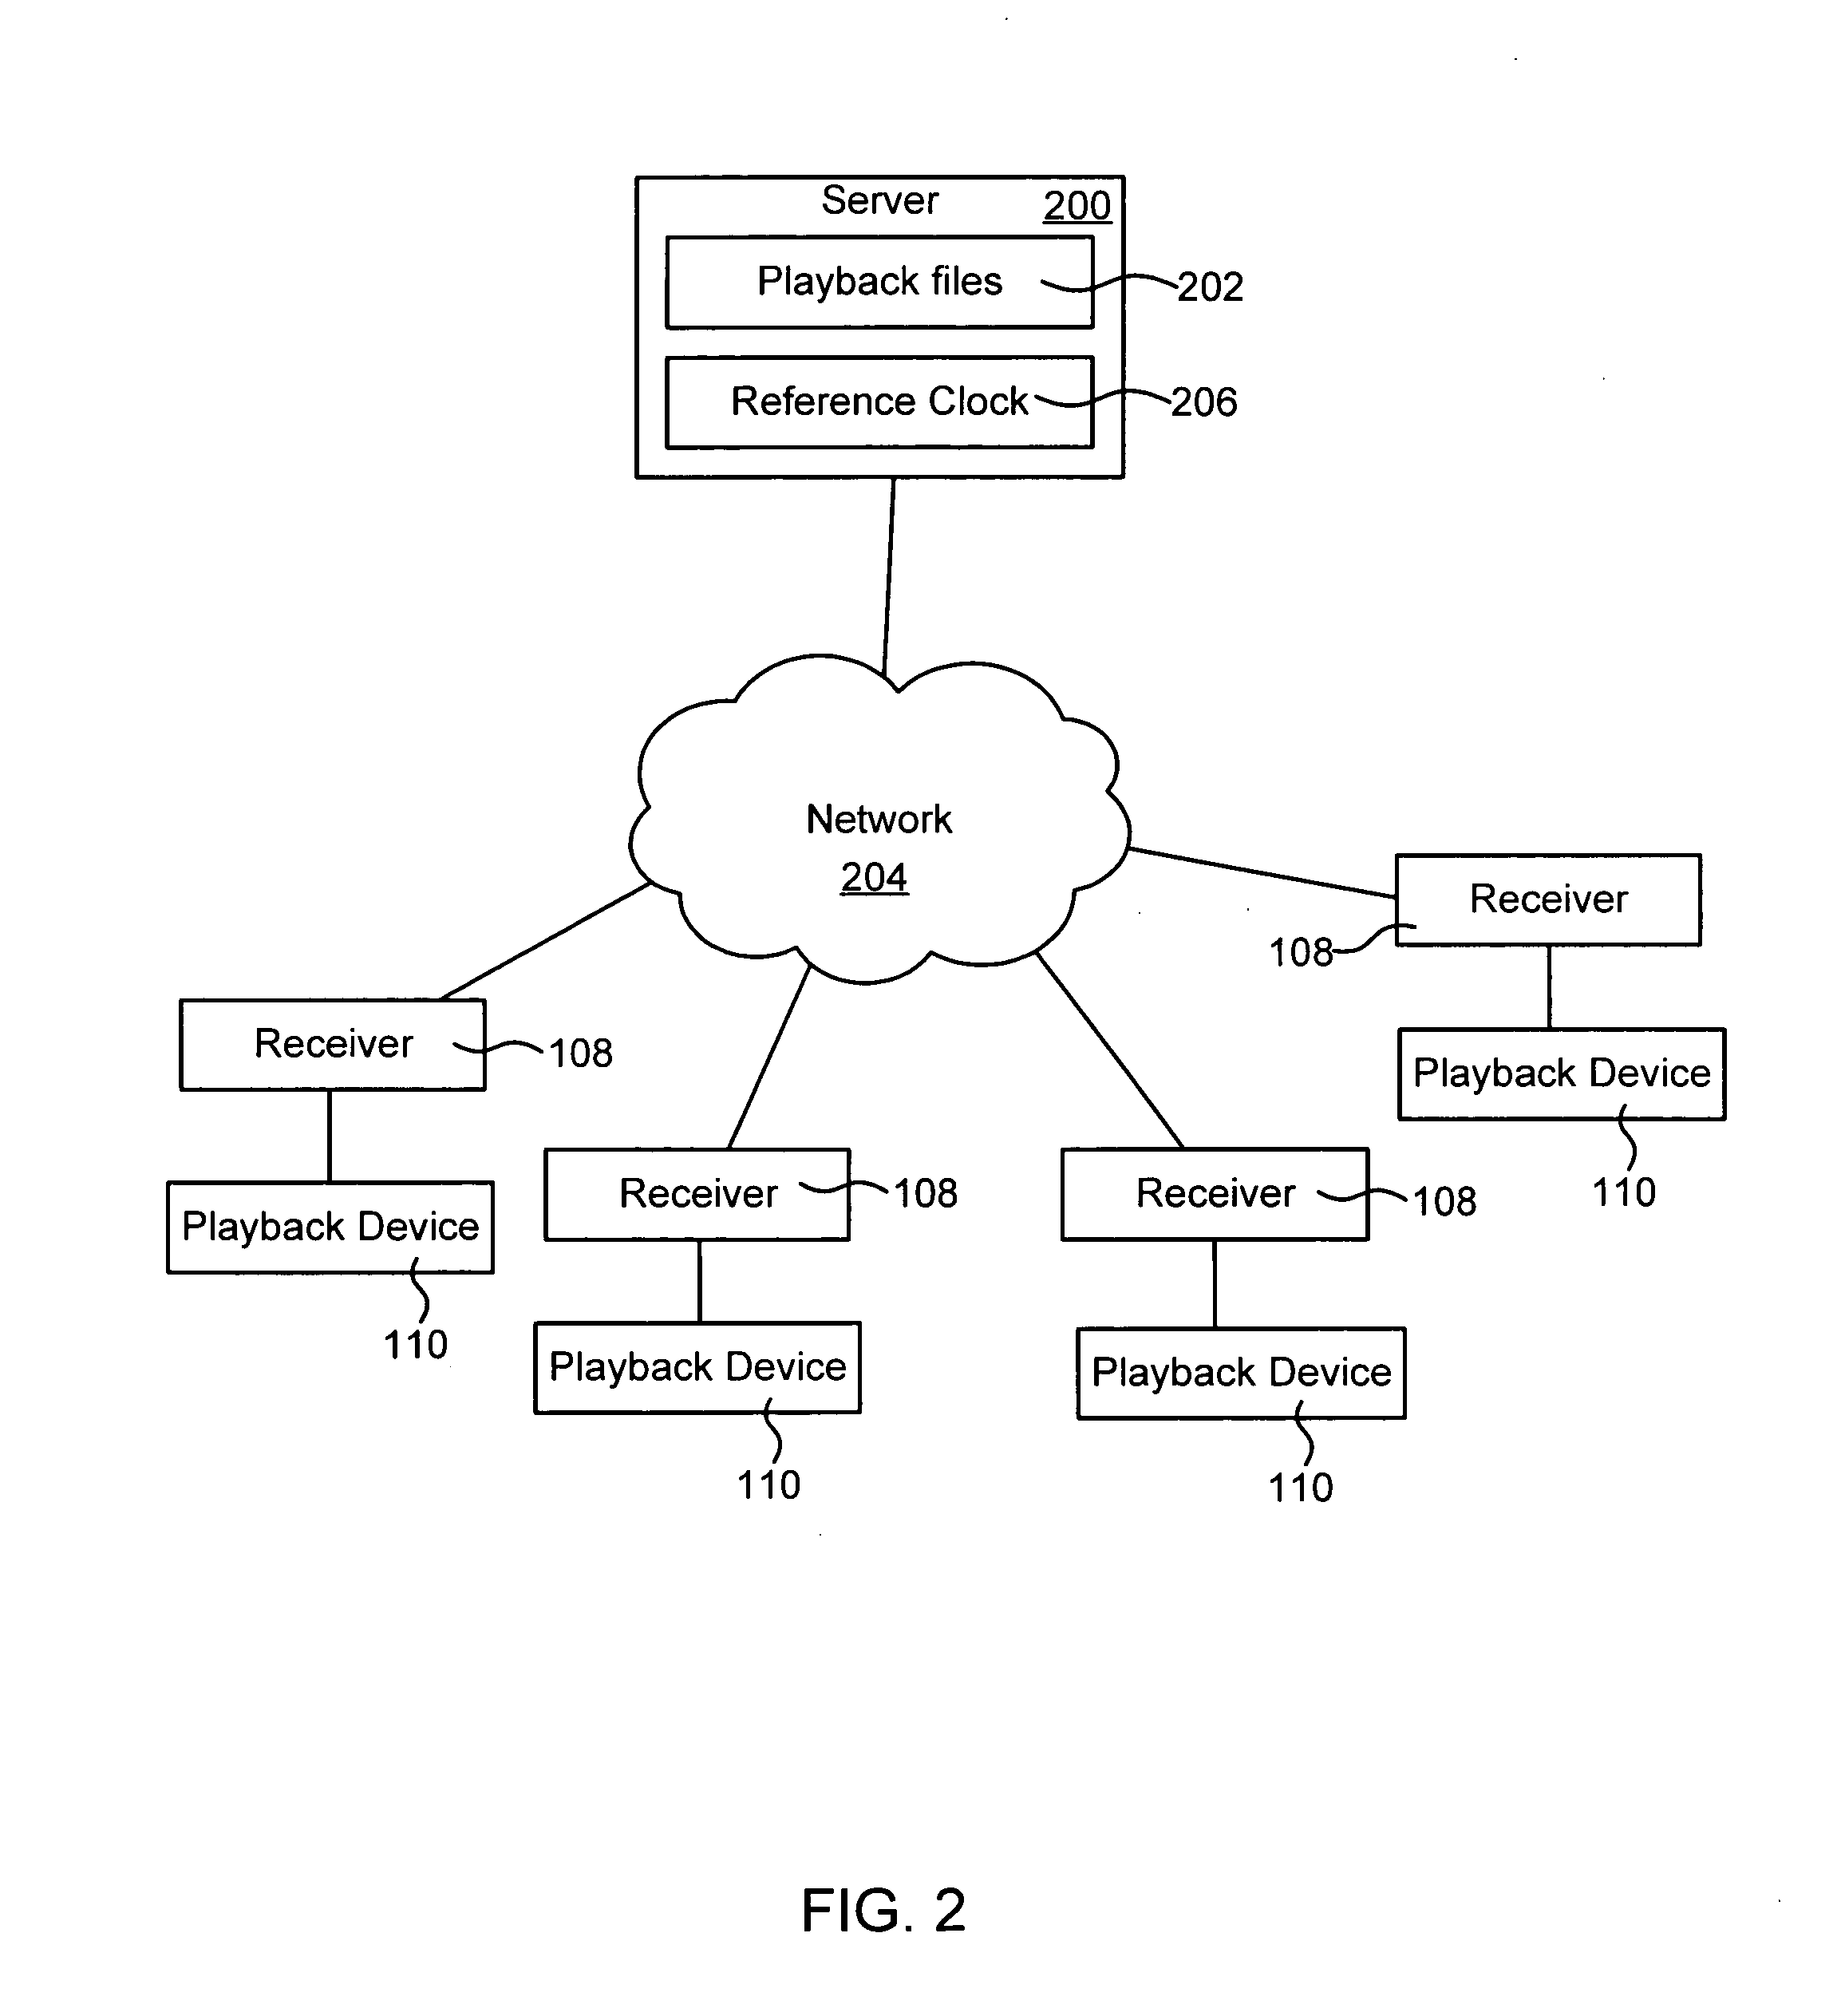 Apparatus, system and method for synchronized playback of data transmitted over an asynchronous network